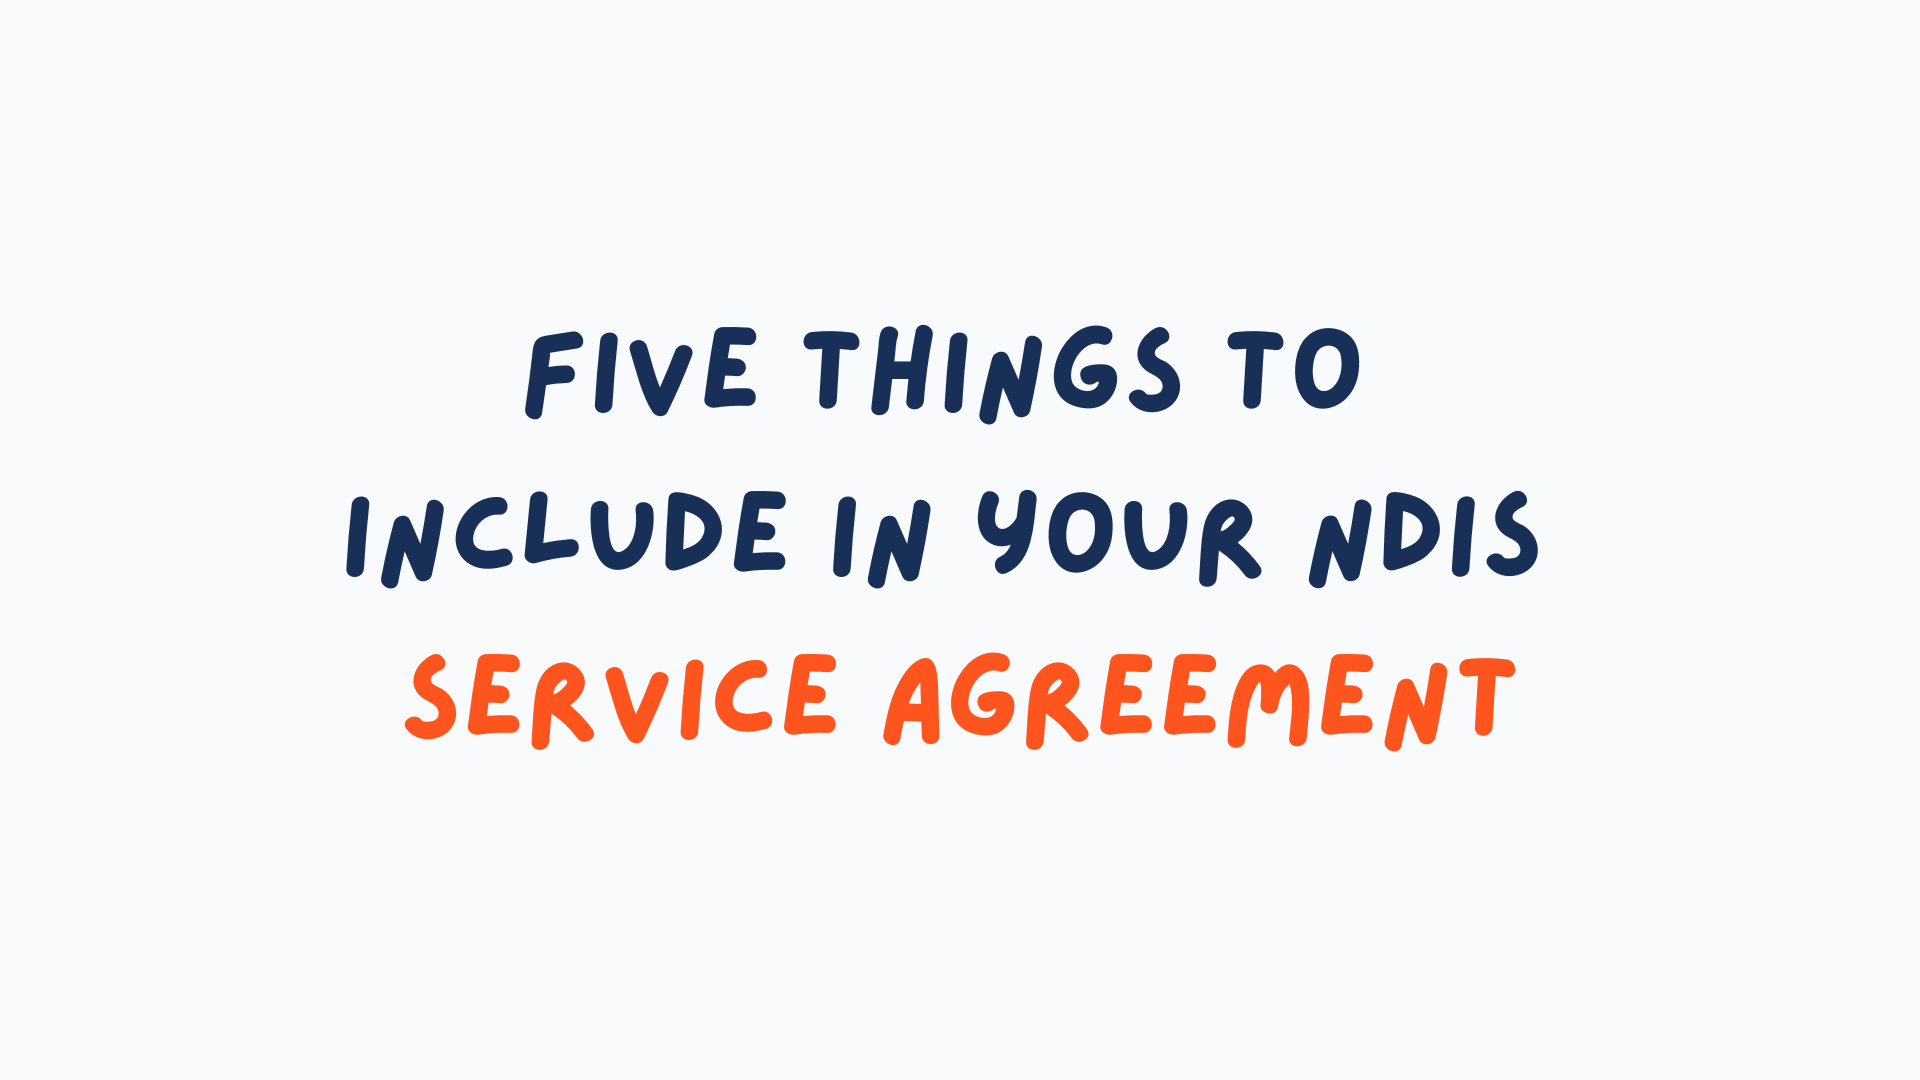 5 Things to Include in Your Service Agreement